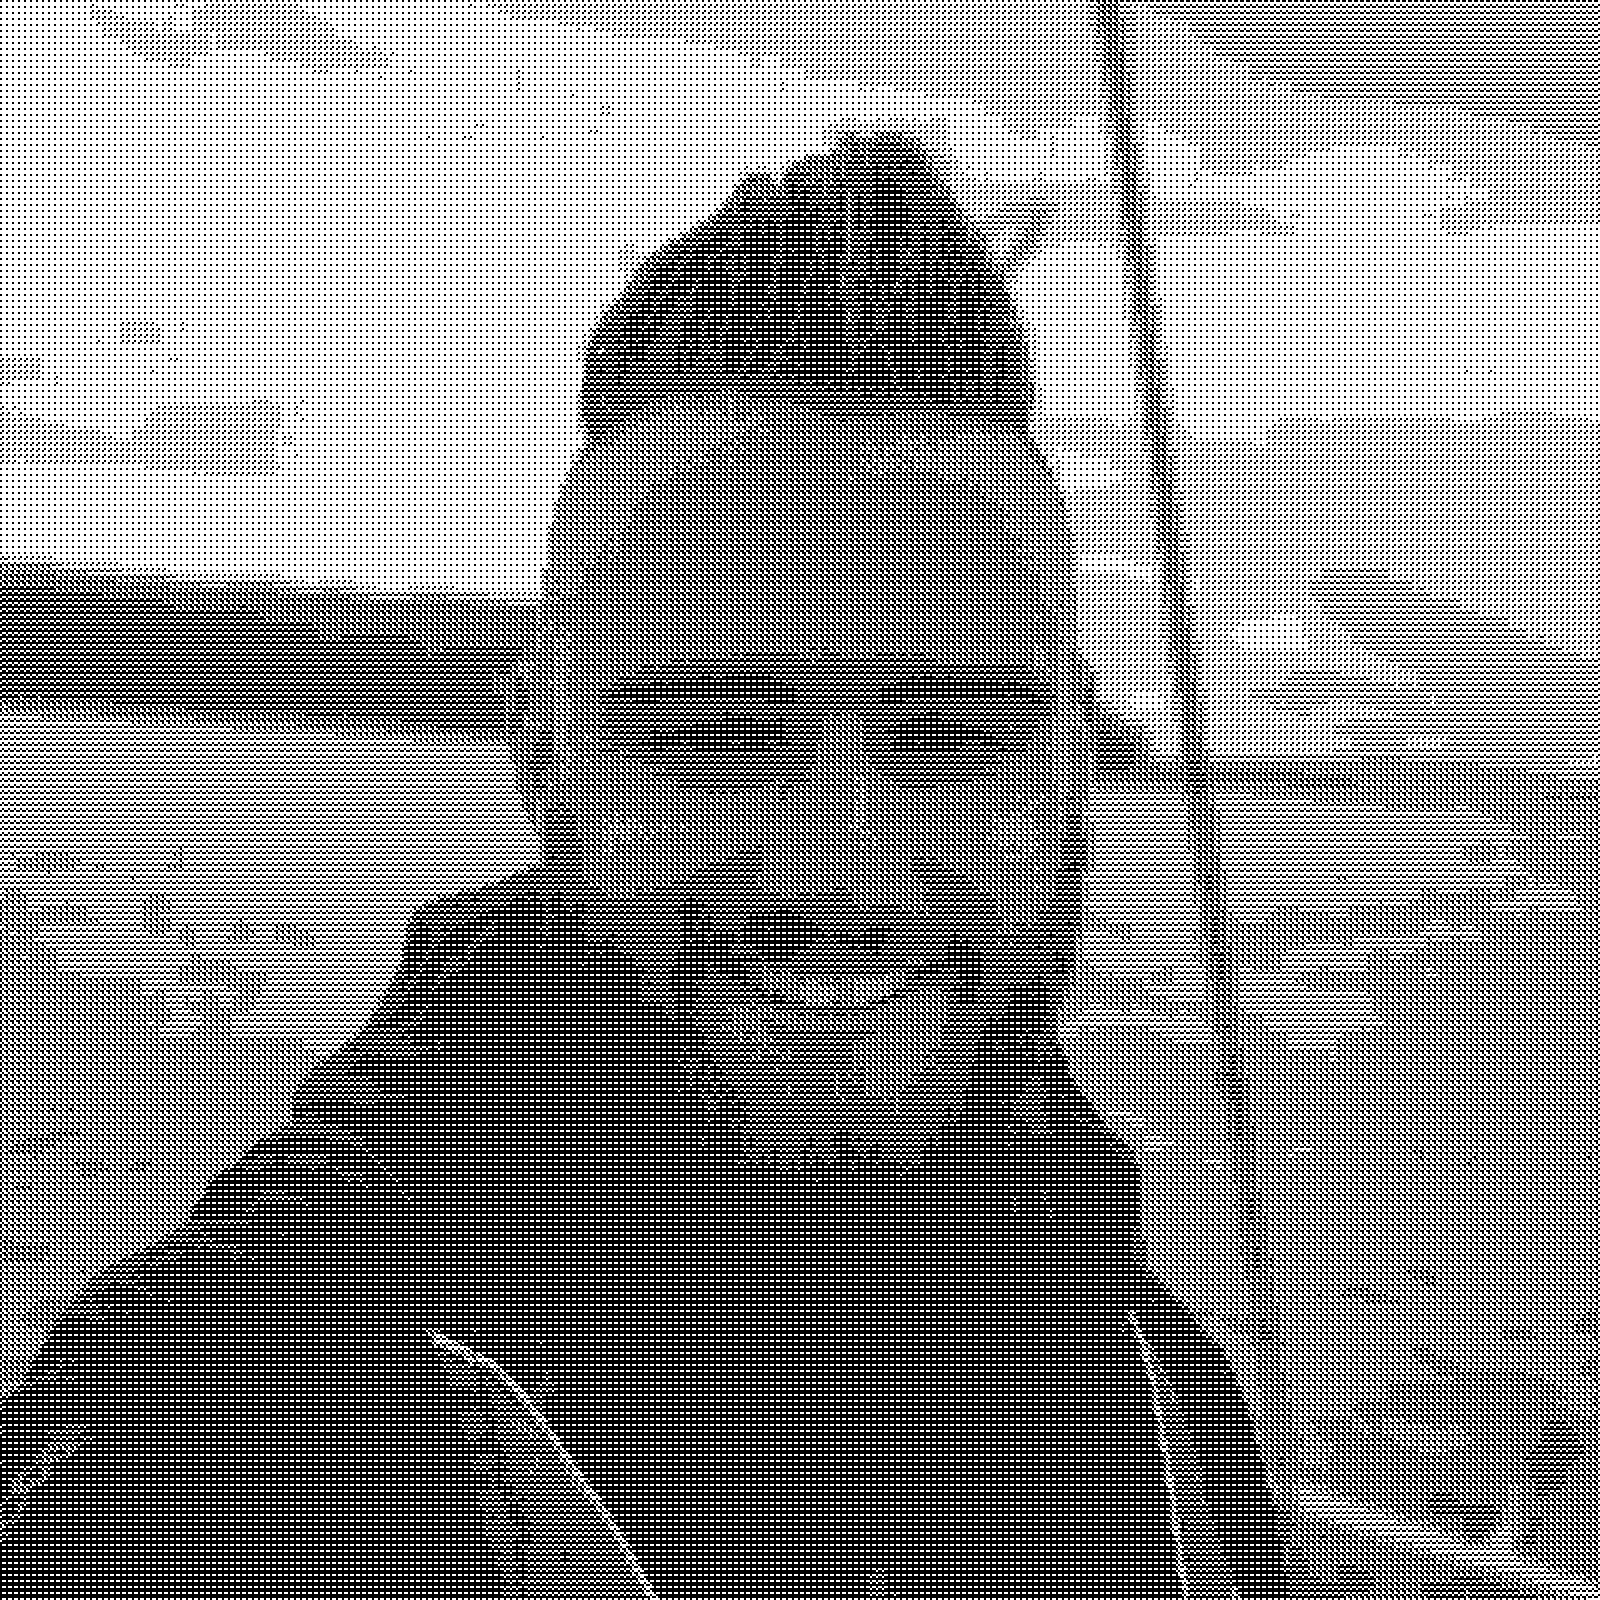 a dithered selfie taken while out sailing